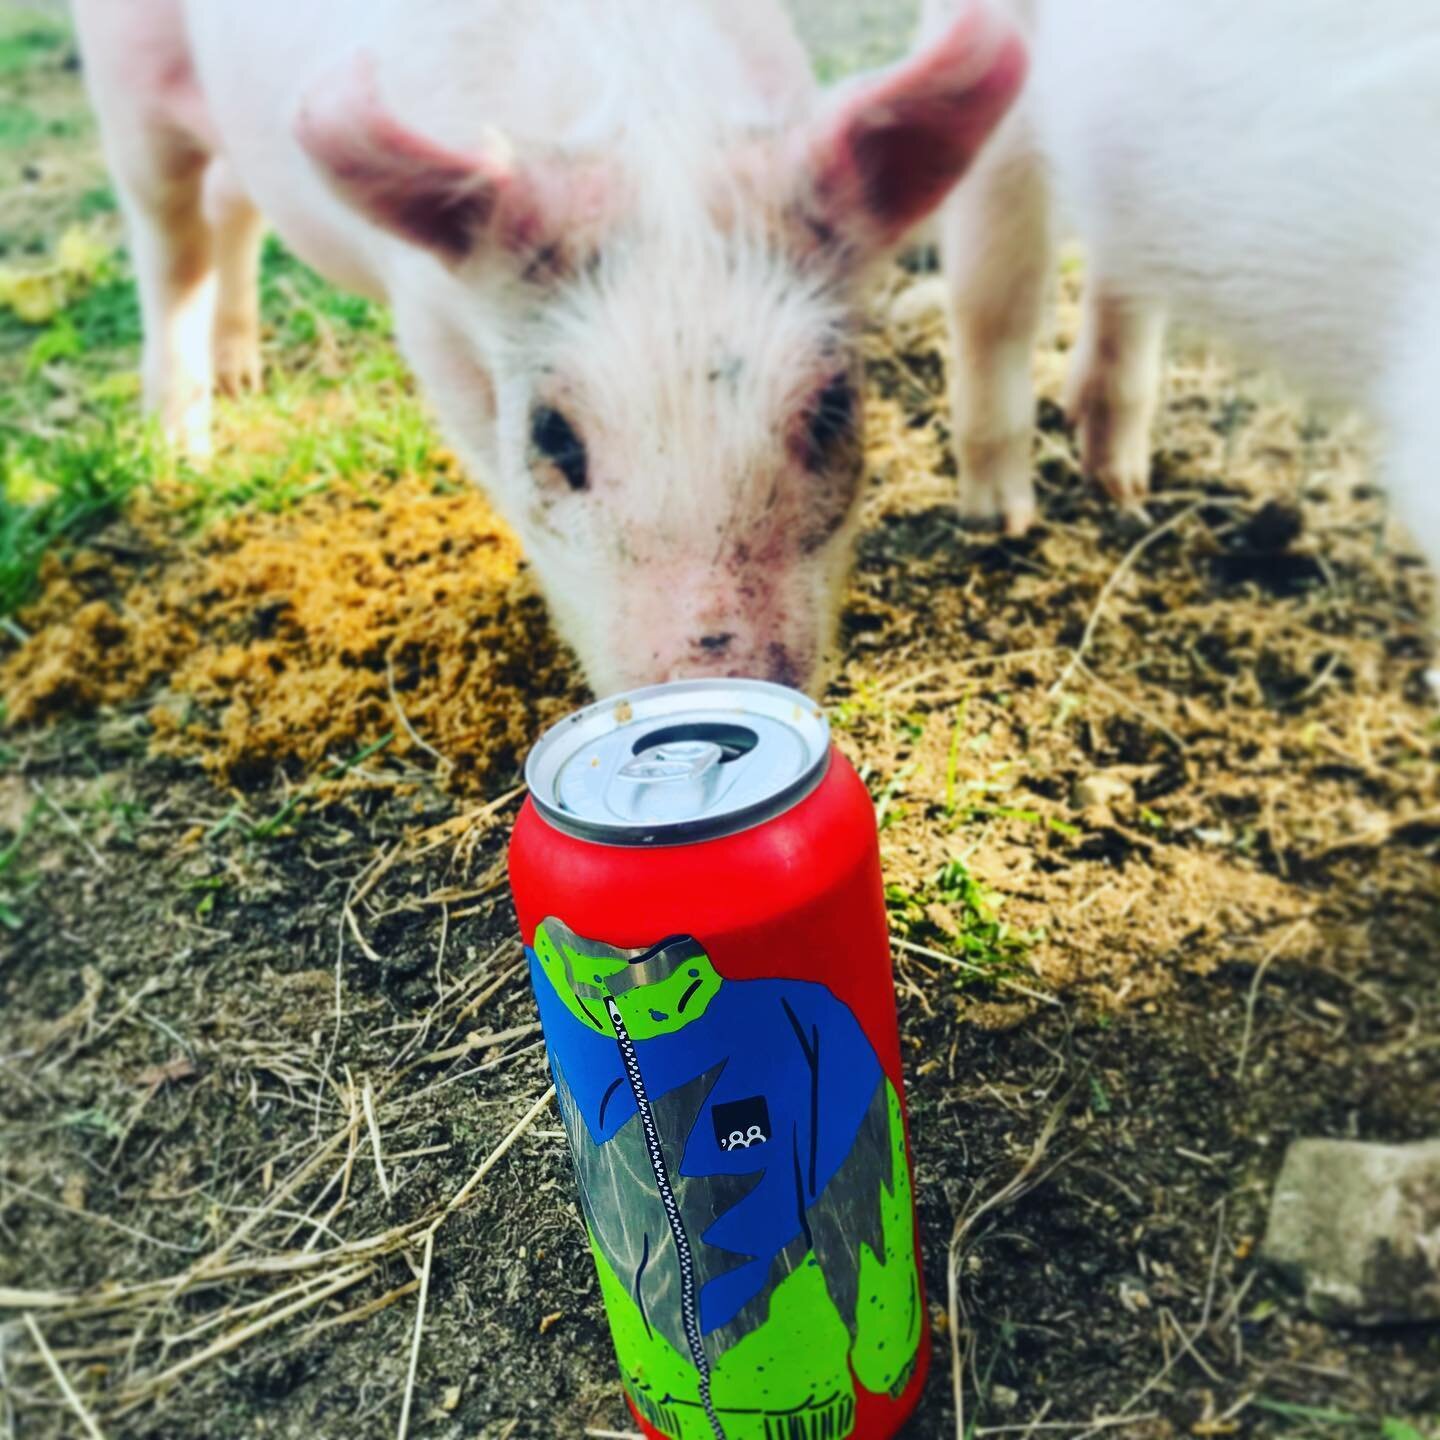 An important question for @eightyeightbrewco ................is their spent grain as great as their beer 🍺⁉️ The pigs 🐖 tested, and well... YUP 💯
Peaches and Lil&rsquo;Hammy approve ✅✅✅
&bull;
&bull;
&bull;
&bull;
&bull;
&bull;
Thanks to @eightyei